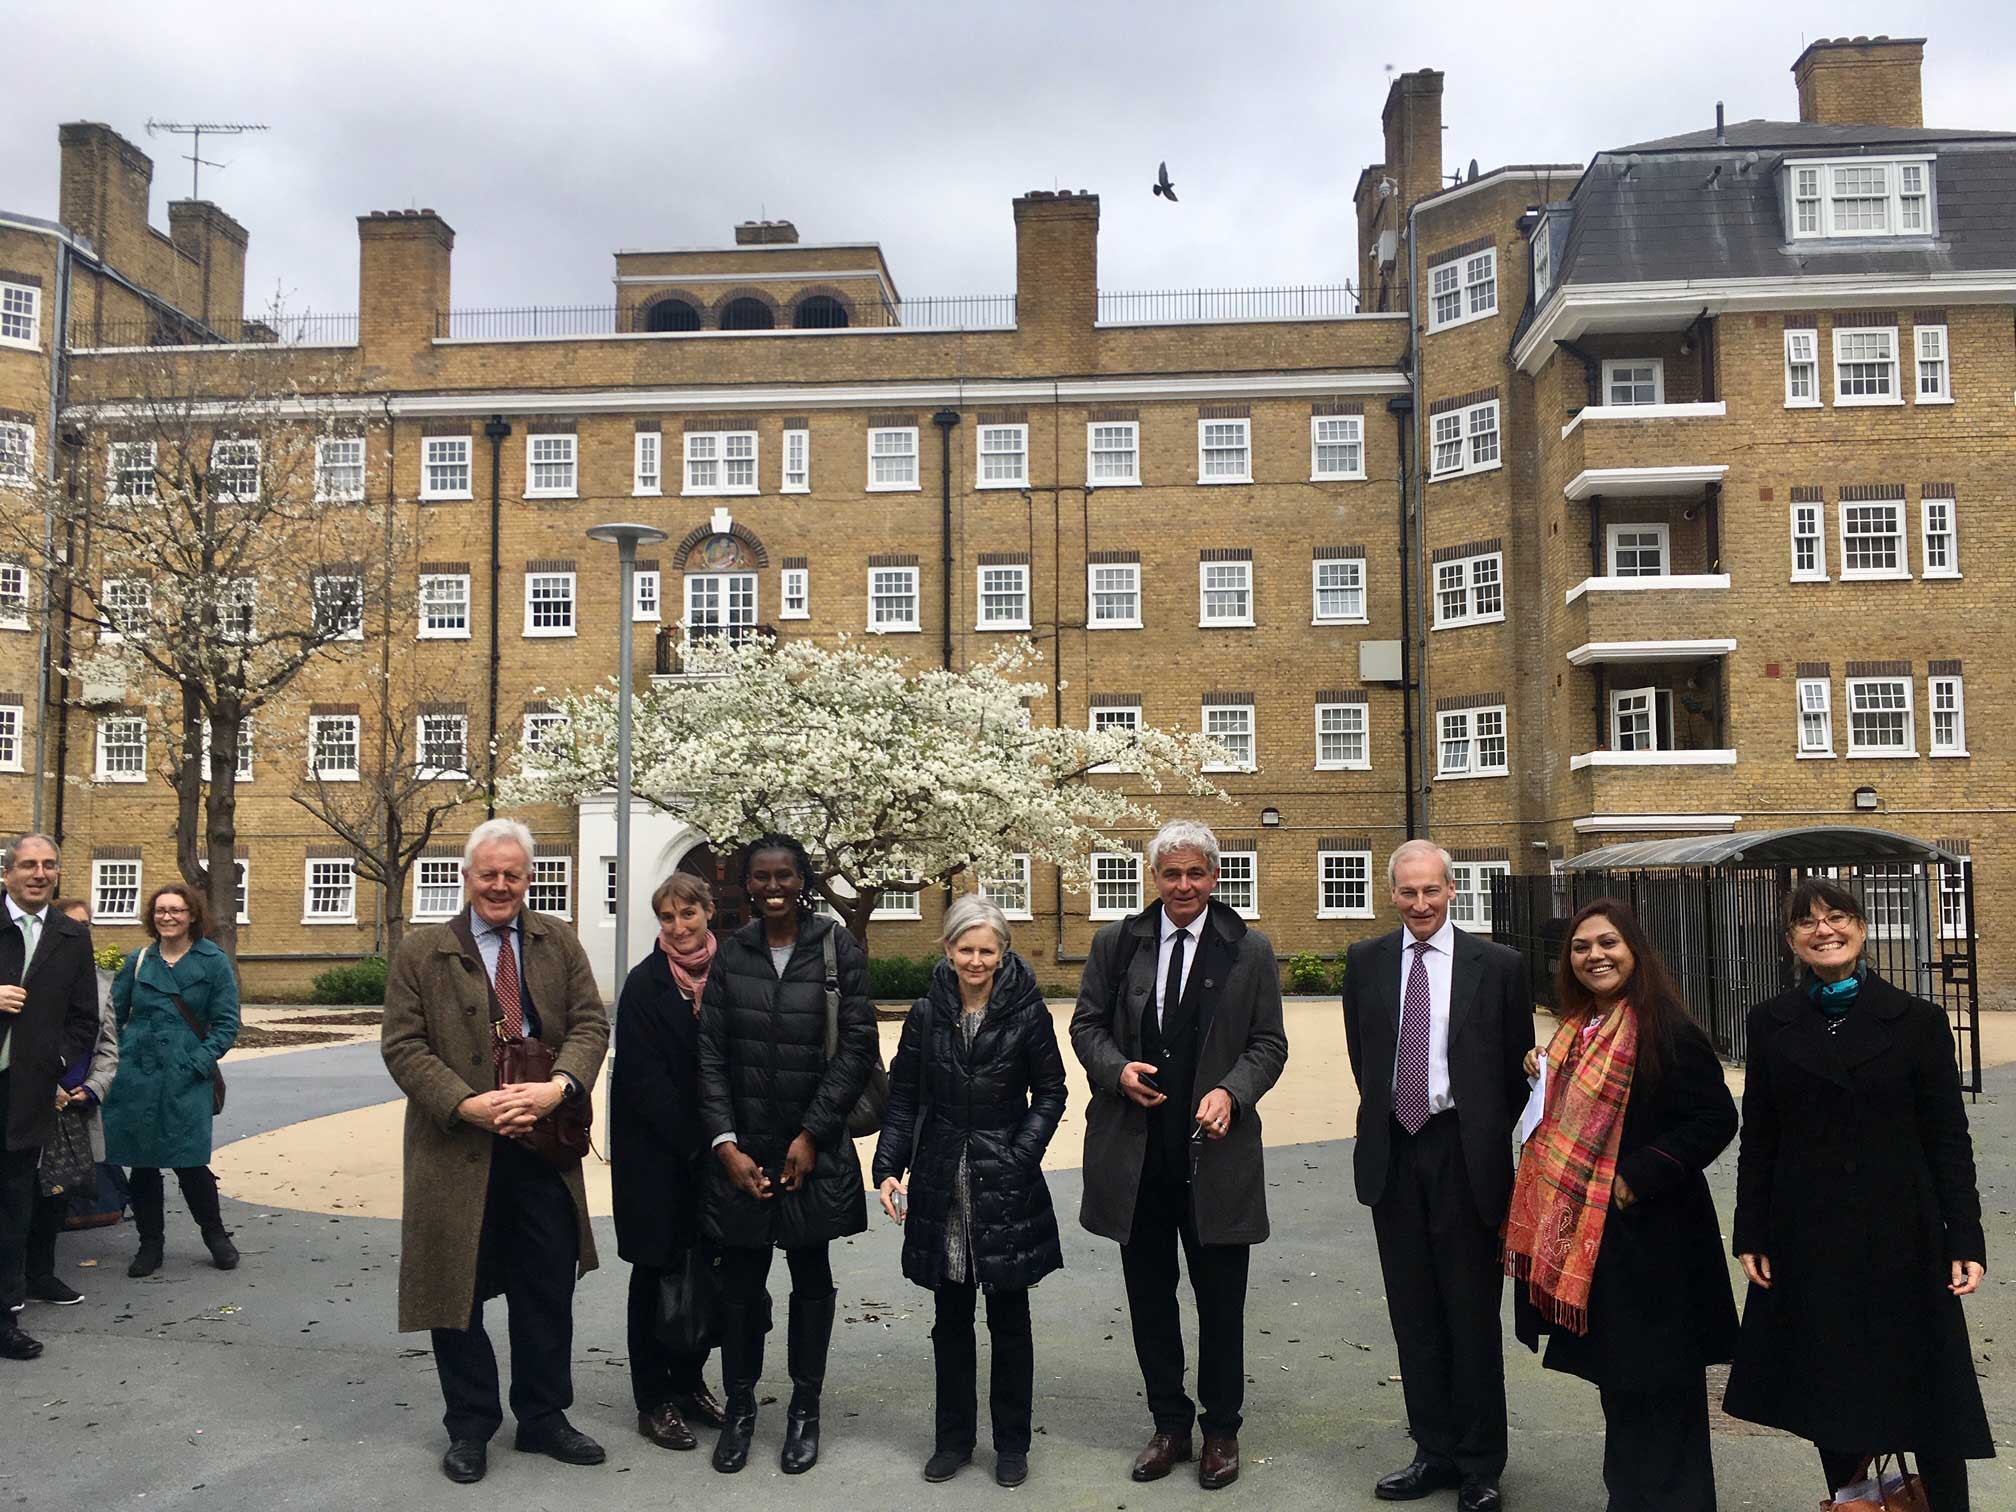 Members of Historic England's Commission, Chief Executive, Chair and staff on a visit to historic buildings in London.